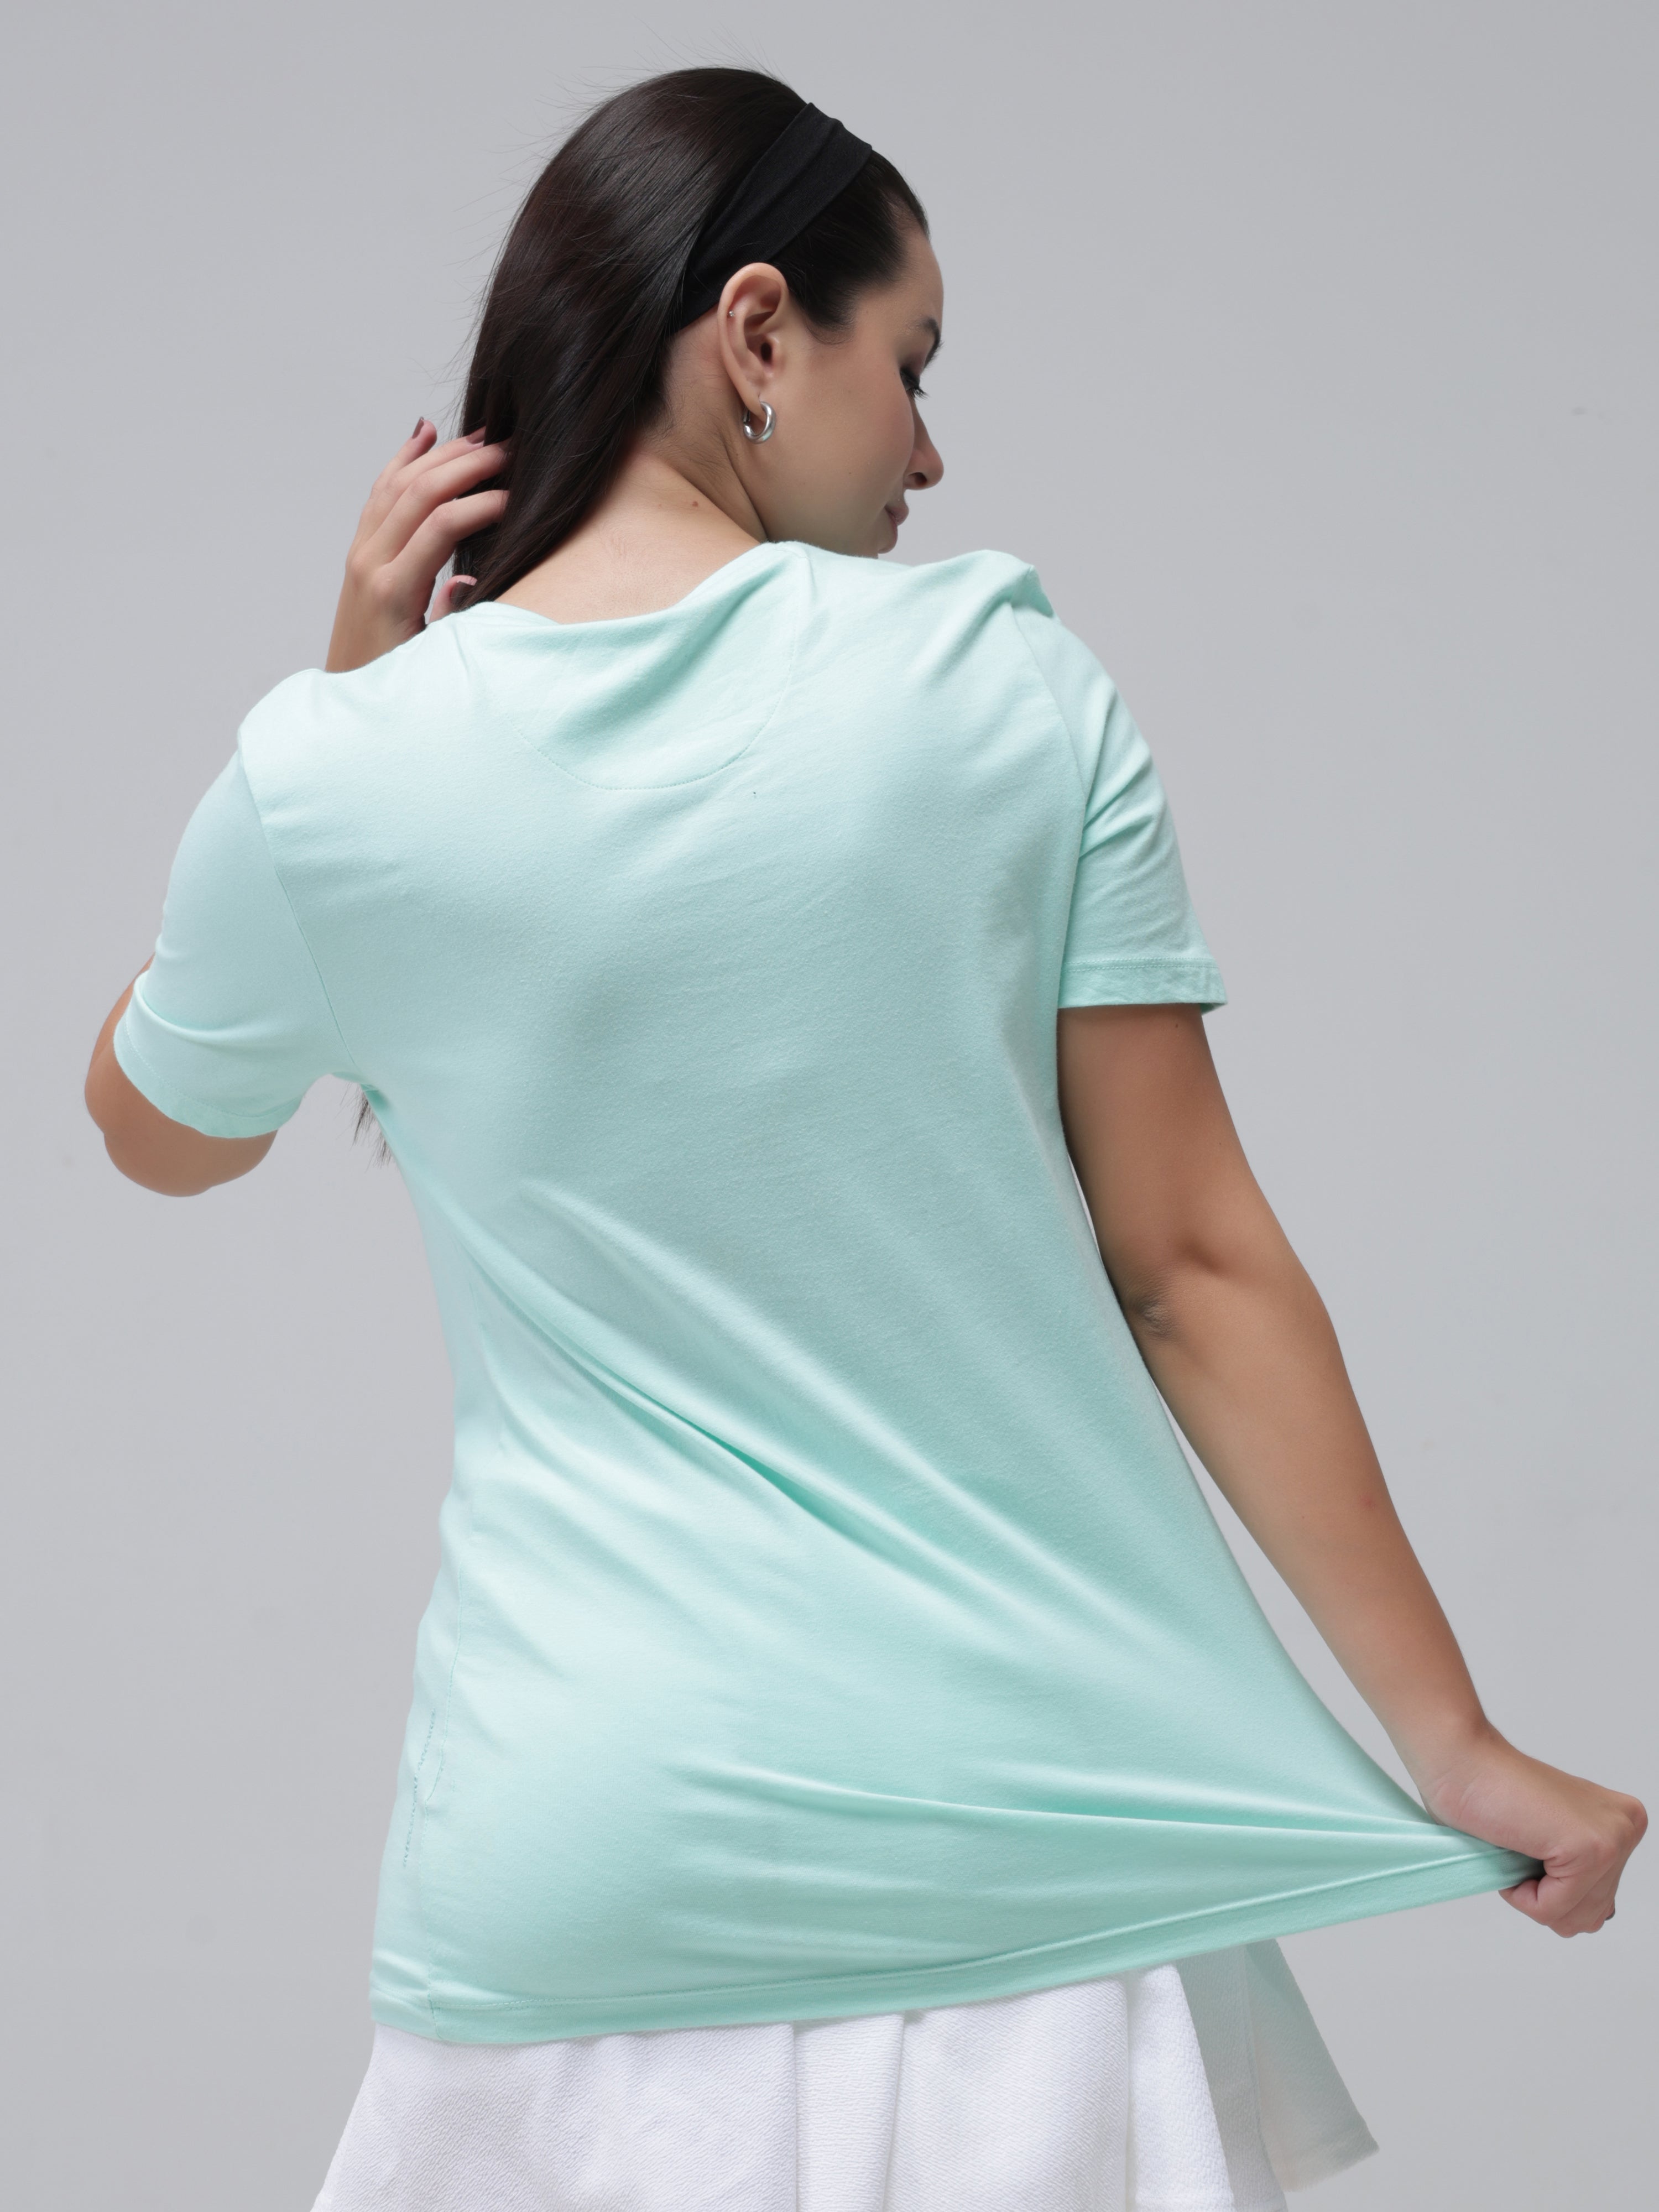 Woman wearing Aqua round-neck Turms t-shirt, showcasing the back. Made from 95% Premium Cotton and 5% Spandex, stain-proof and odor-resistant.